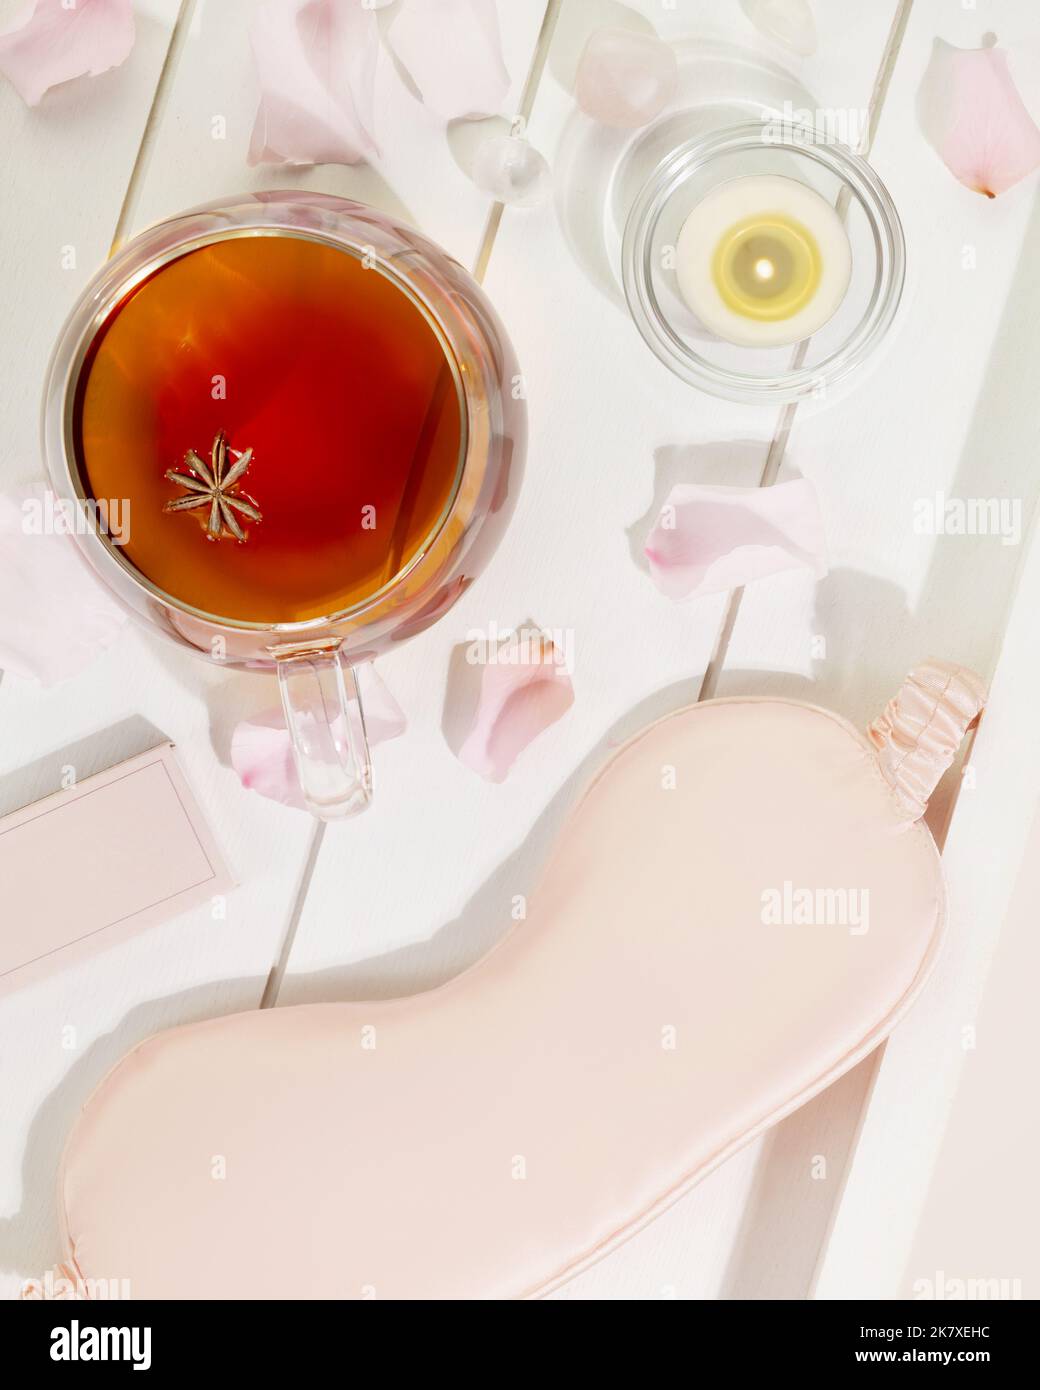 Mask for sleep, cup of tea, candle and rose petals on a white wooden tray Stock Photo